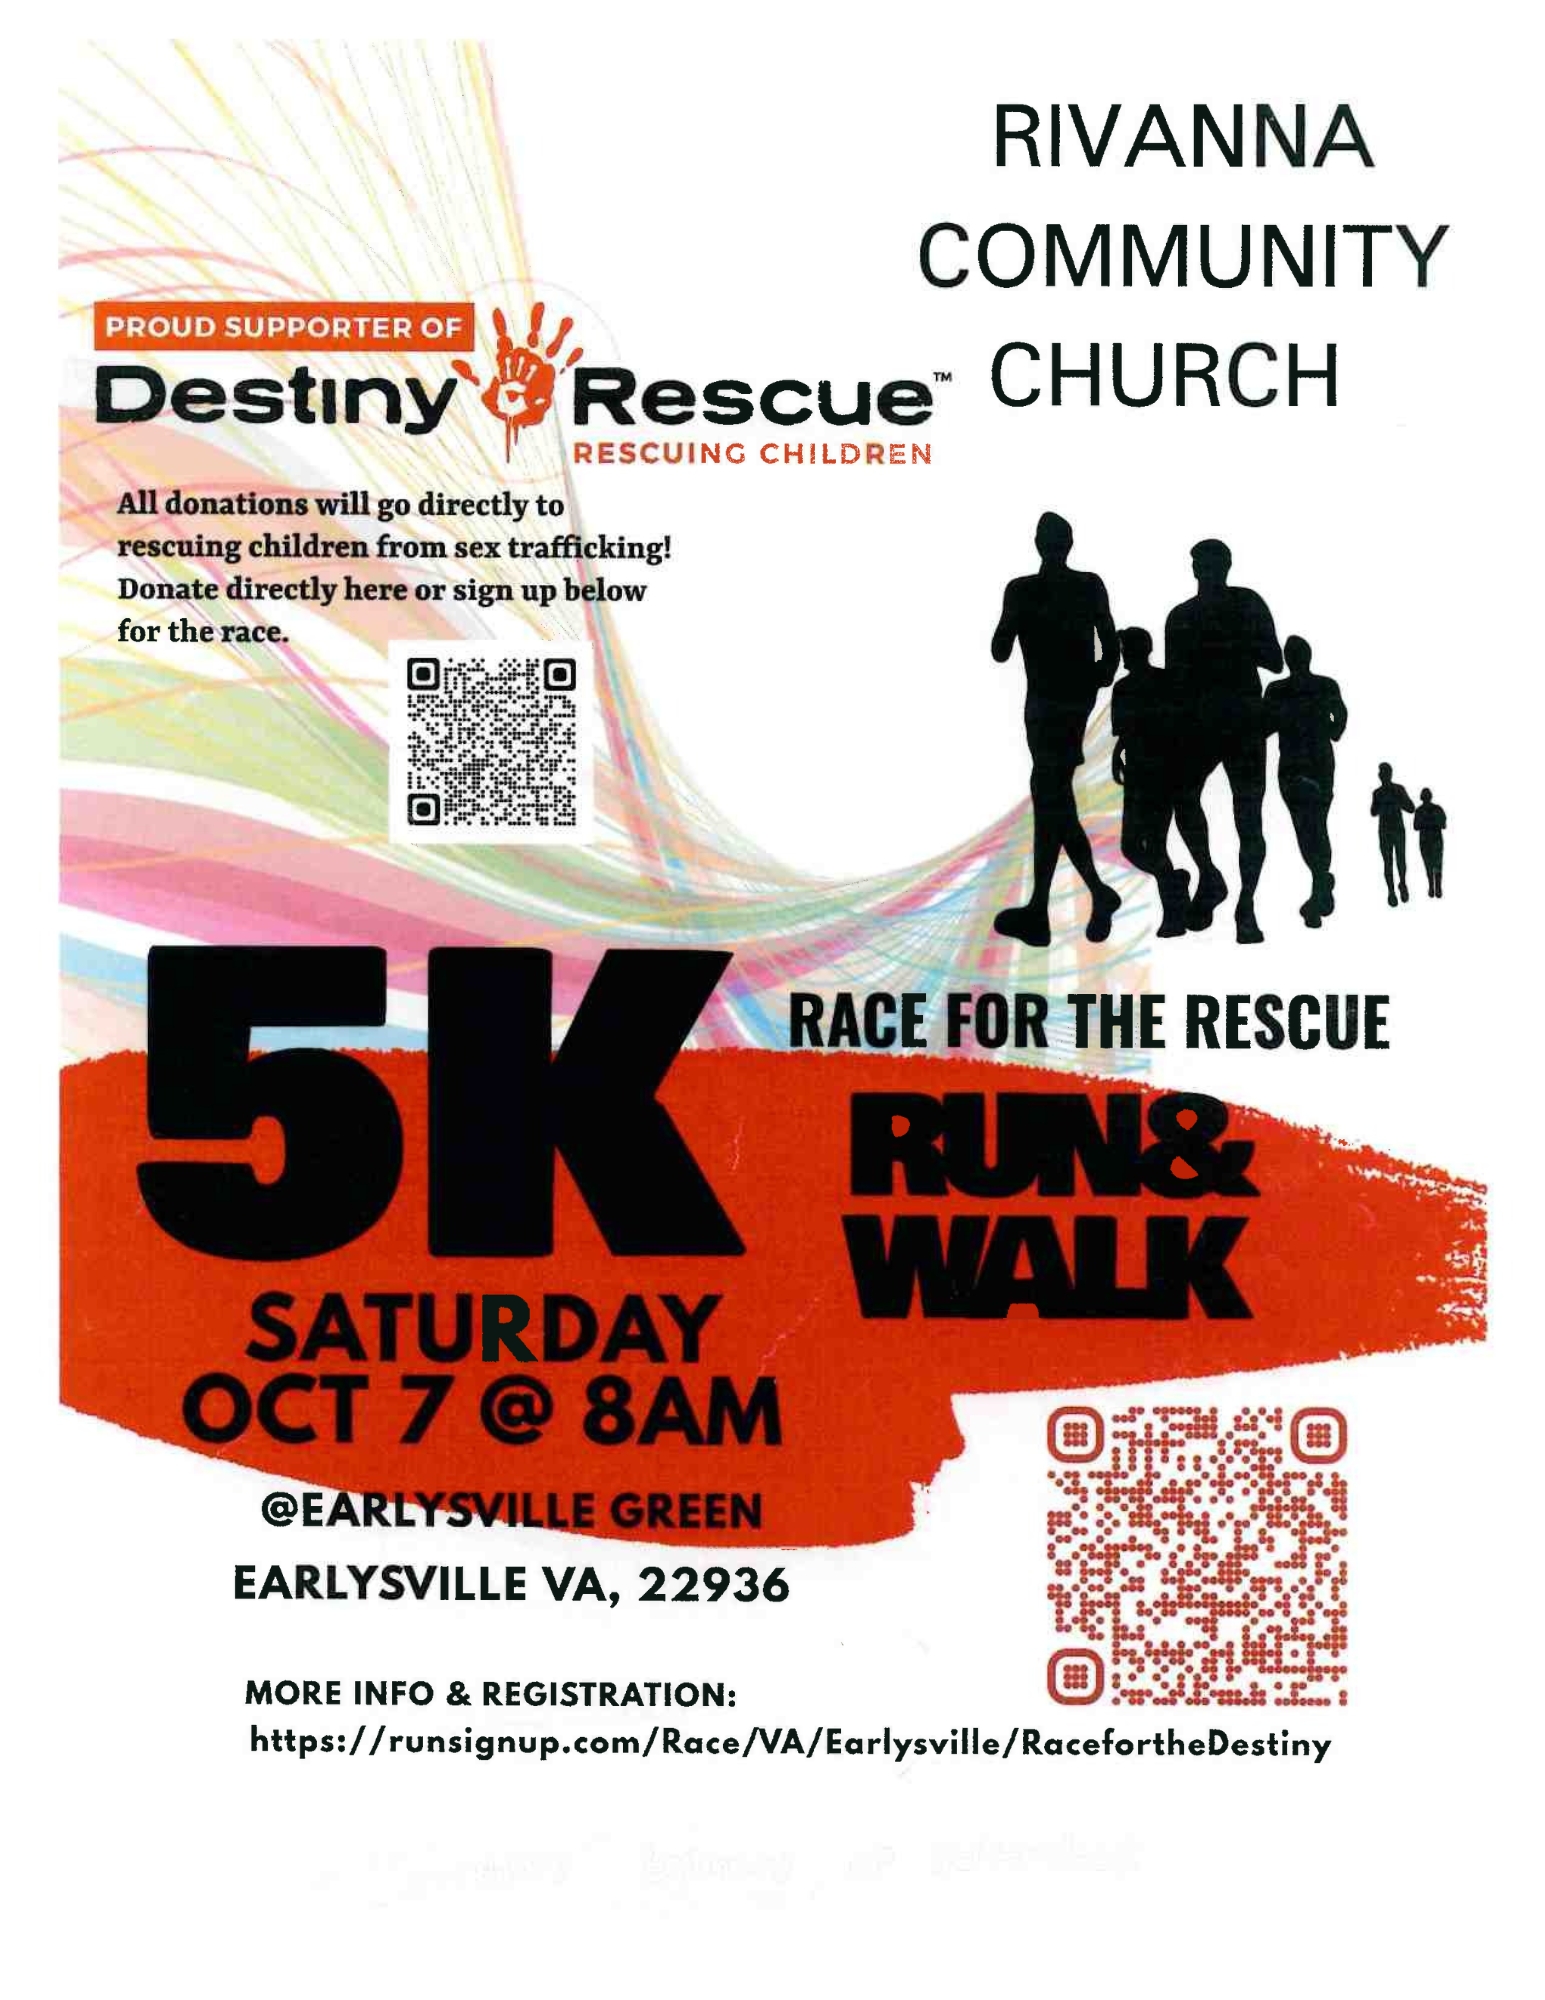 Race For The Rescue: 5K- Sat. Oct 7th